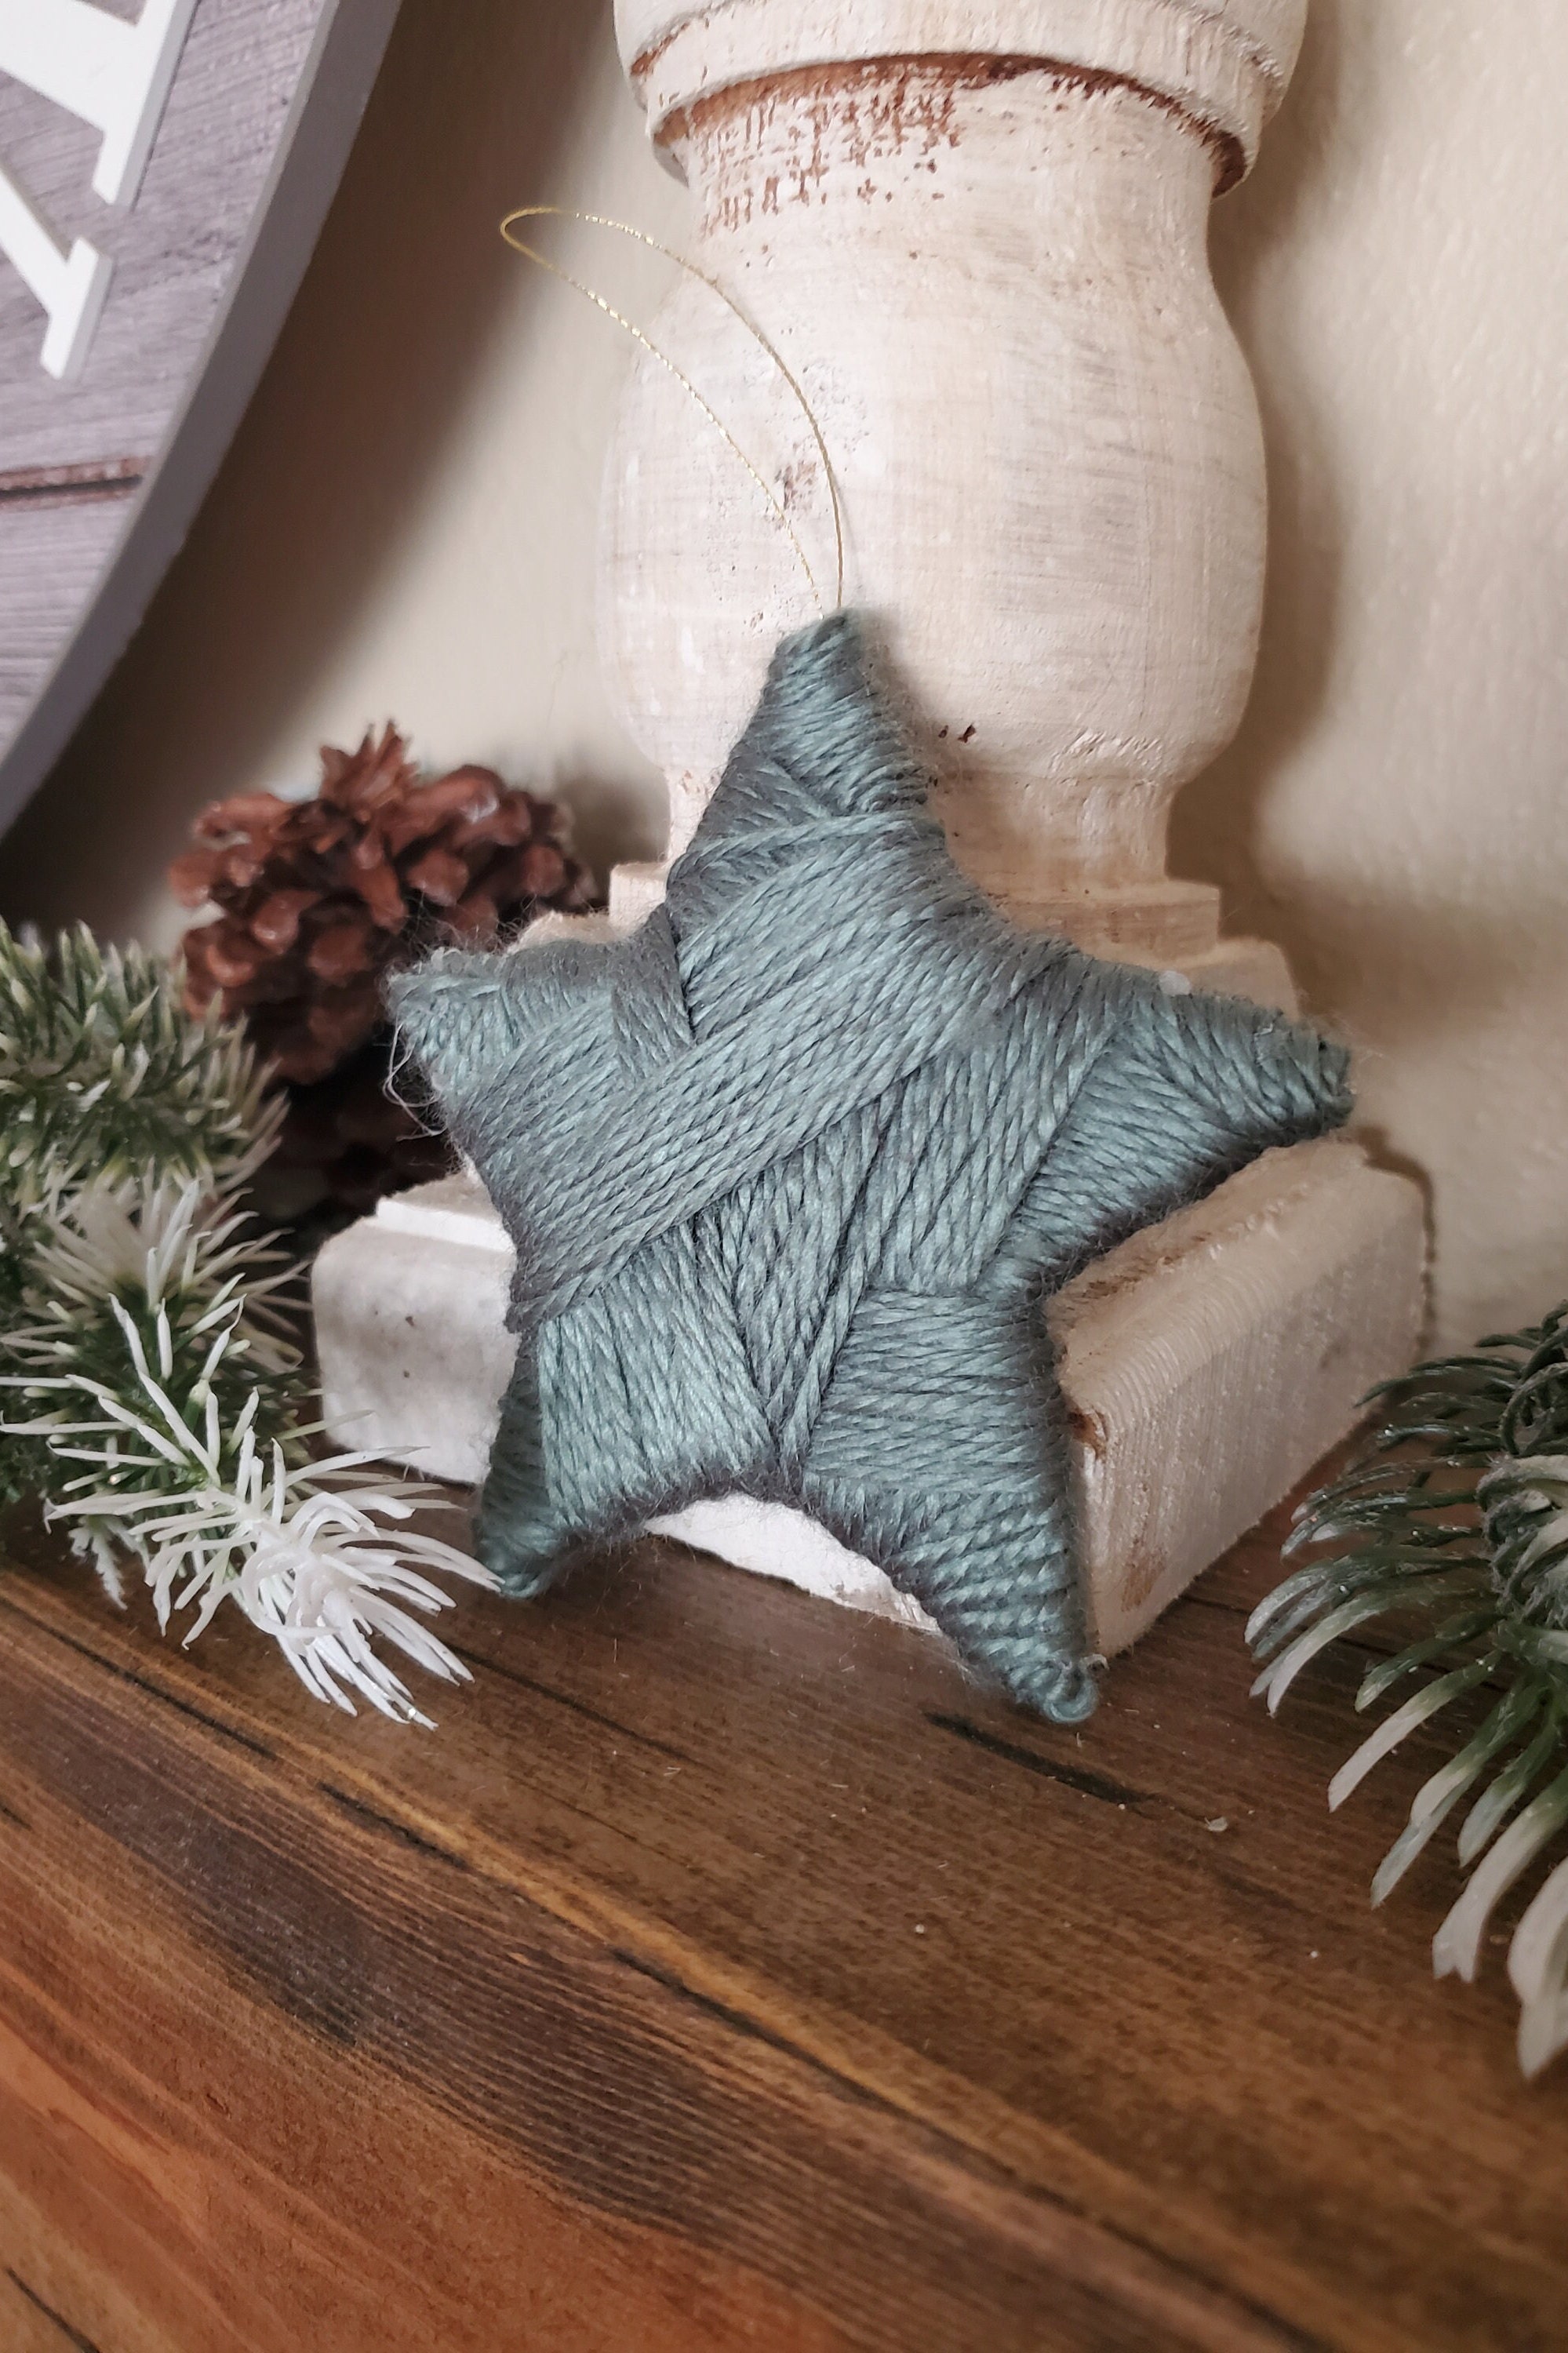 Yarn Christmas Tree Decor With Plaid Ribbon and Rusty Star Topper